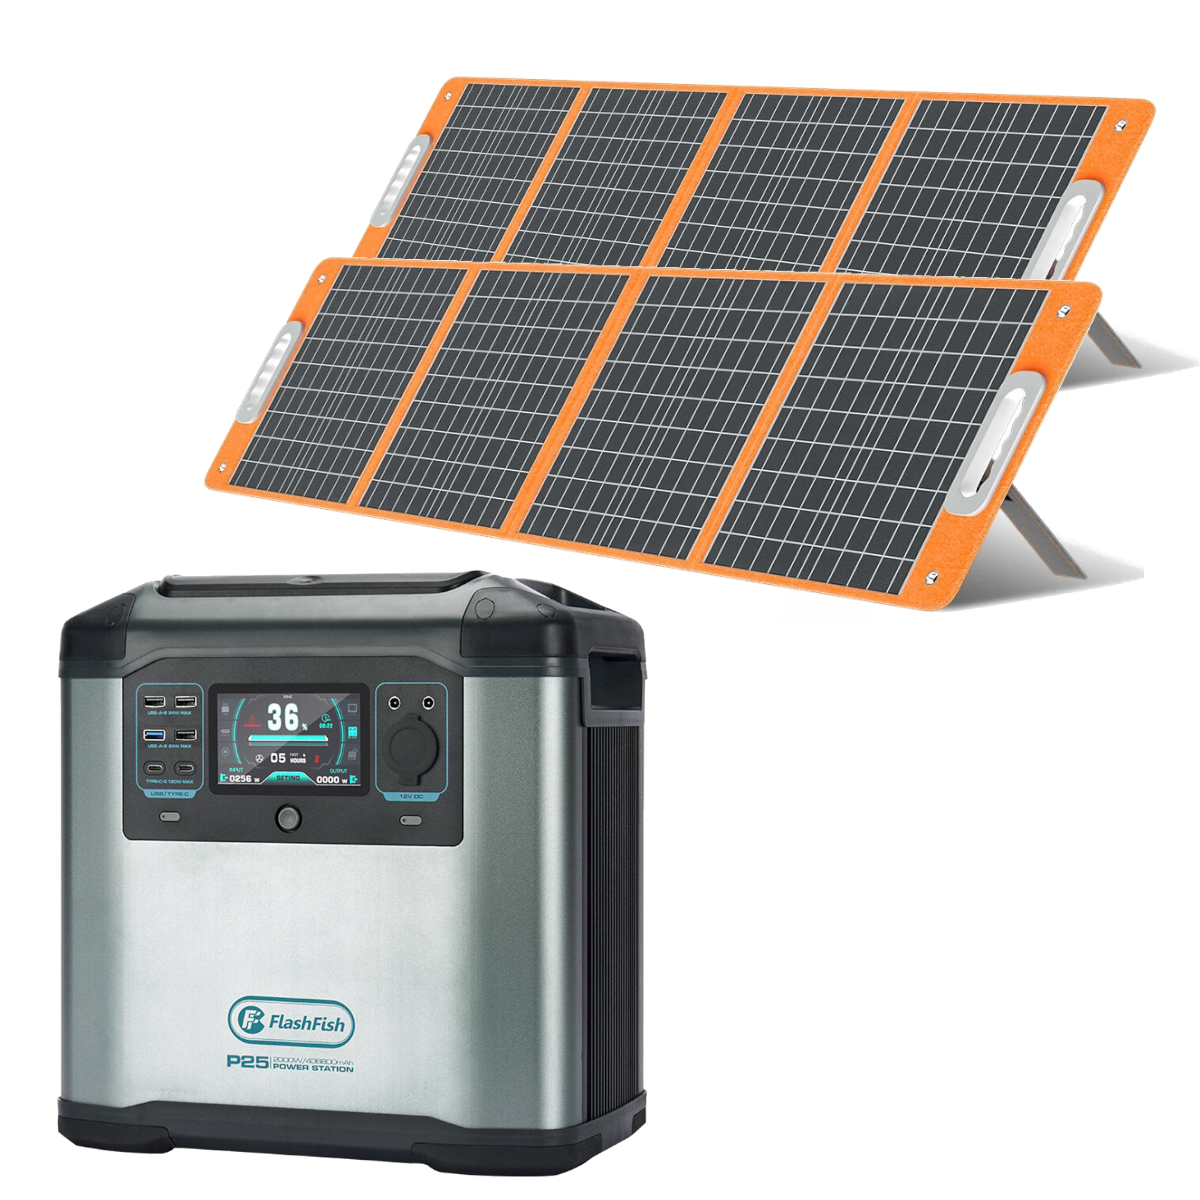 best price,flashfish,p25,power,station,with,2pcs,18v,100w,solar,panel,eu,coupon,price,discount